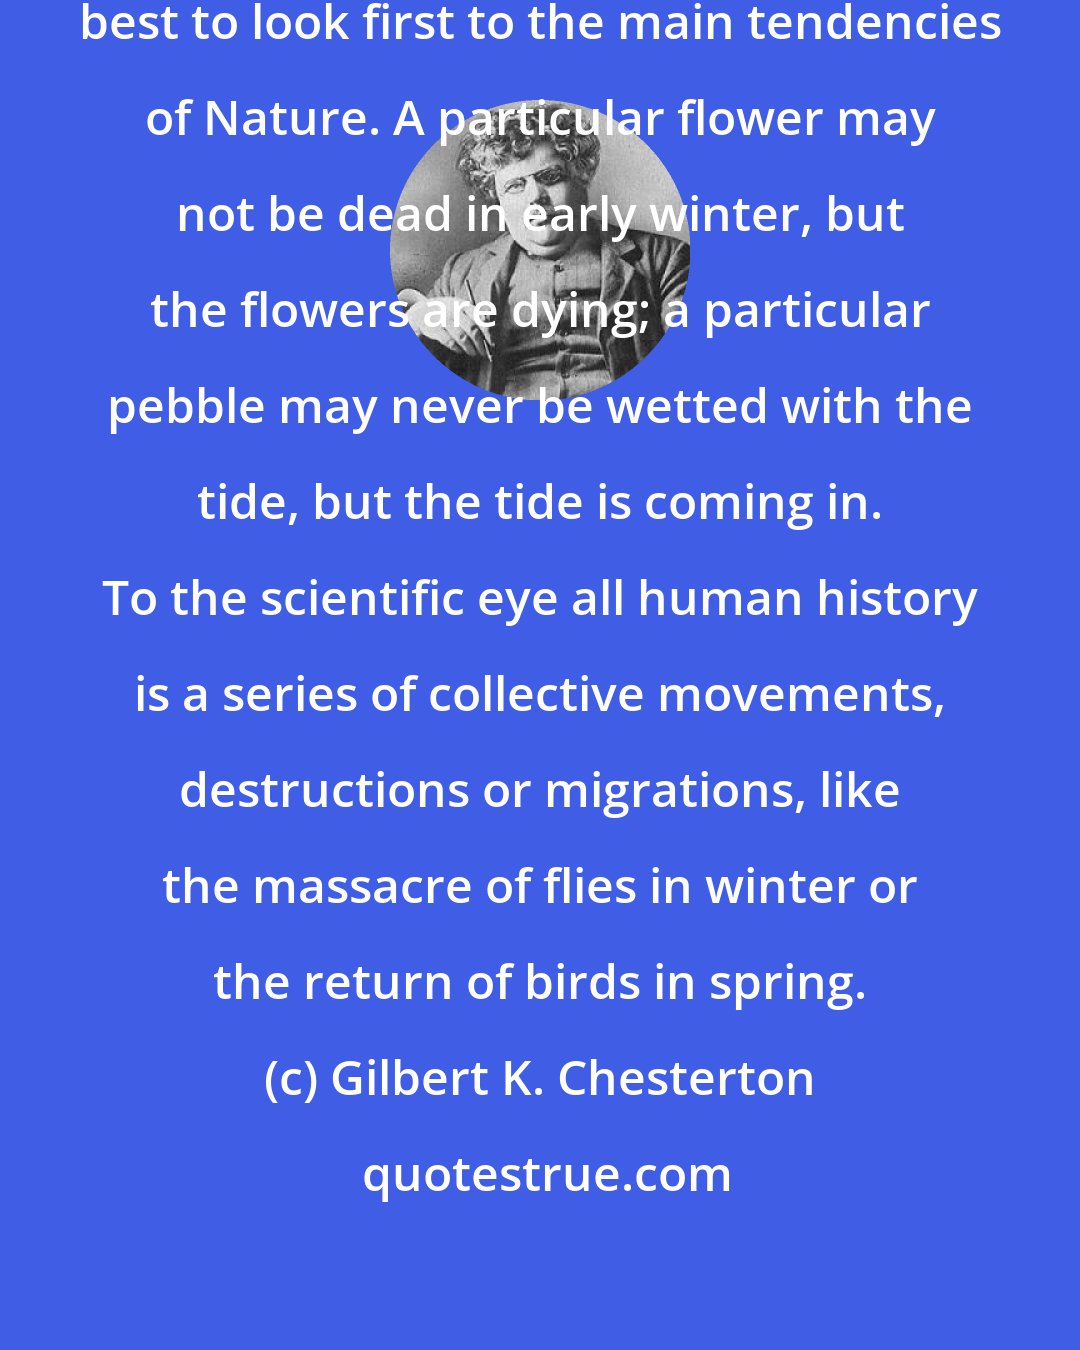 Gilbert K. Chesterton: Even in a minute instance, it is best to look first to the main tendencies of Nature. A particular flower may not be dead in early winter, but the flowers are dying; a particular pebble may never be wetted with the tide, but the tide is coming in. To the scientific eye all human history is a series of collective movements, destructions or migrations, like the massacre of flies in winter or the return of birds in spring.